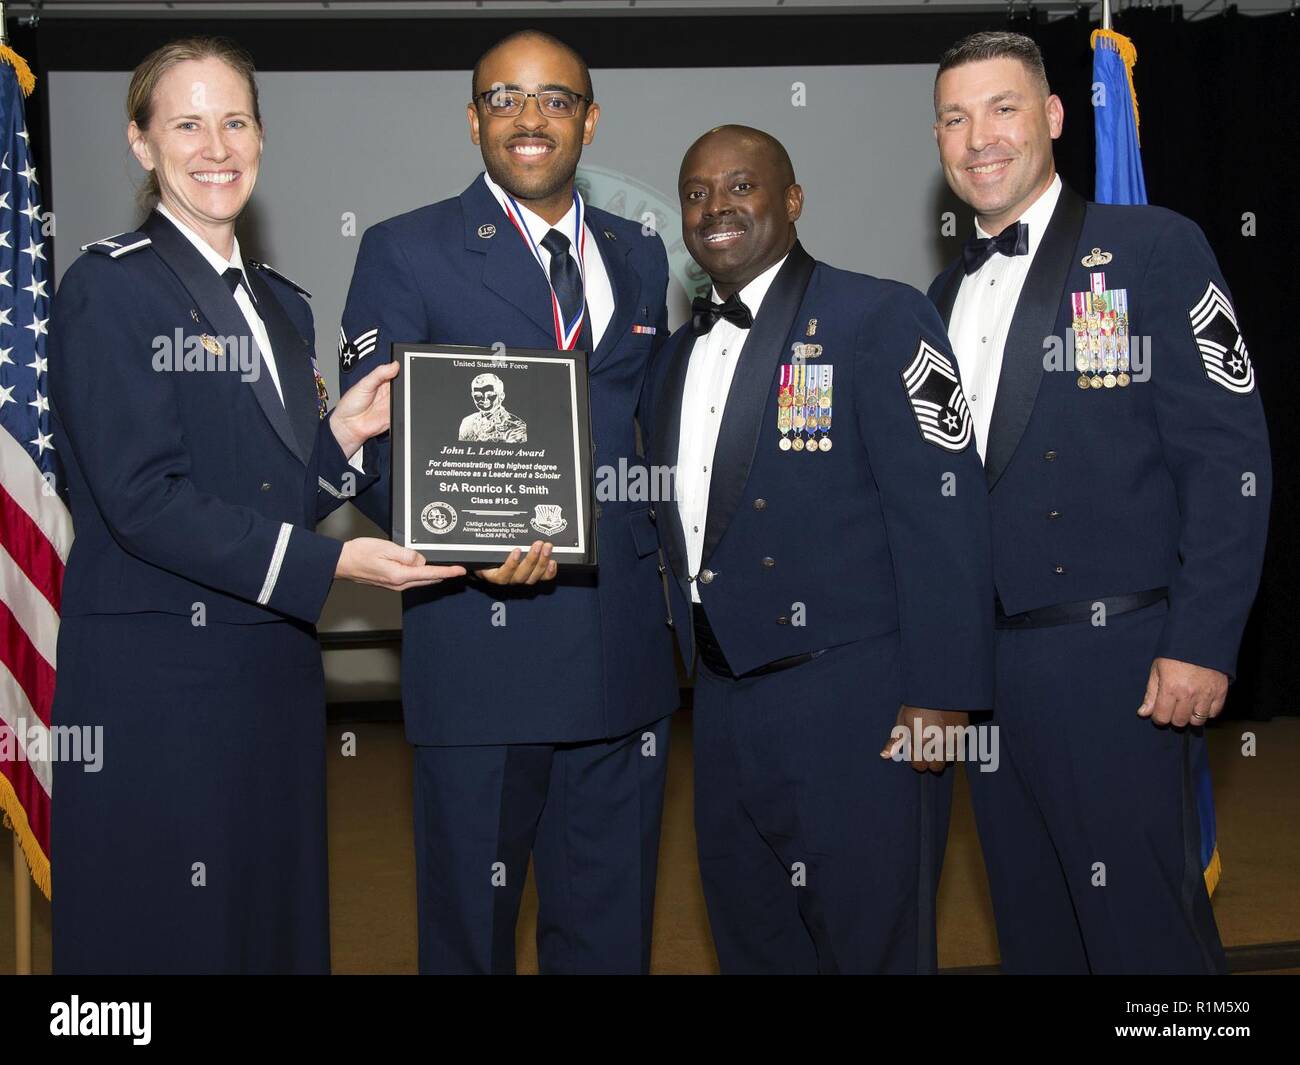 (Second from left) U.S. Air Force Senior Airman Ronrico Smith is ...